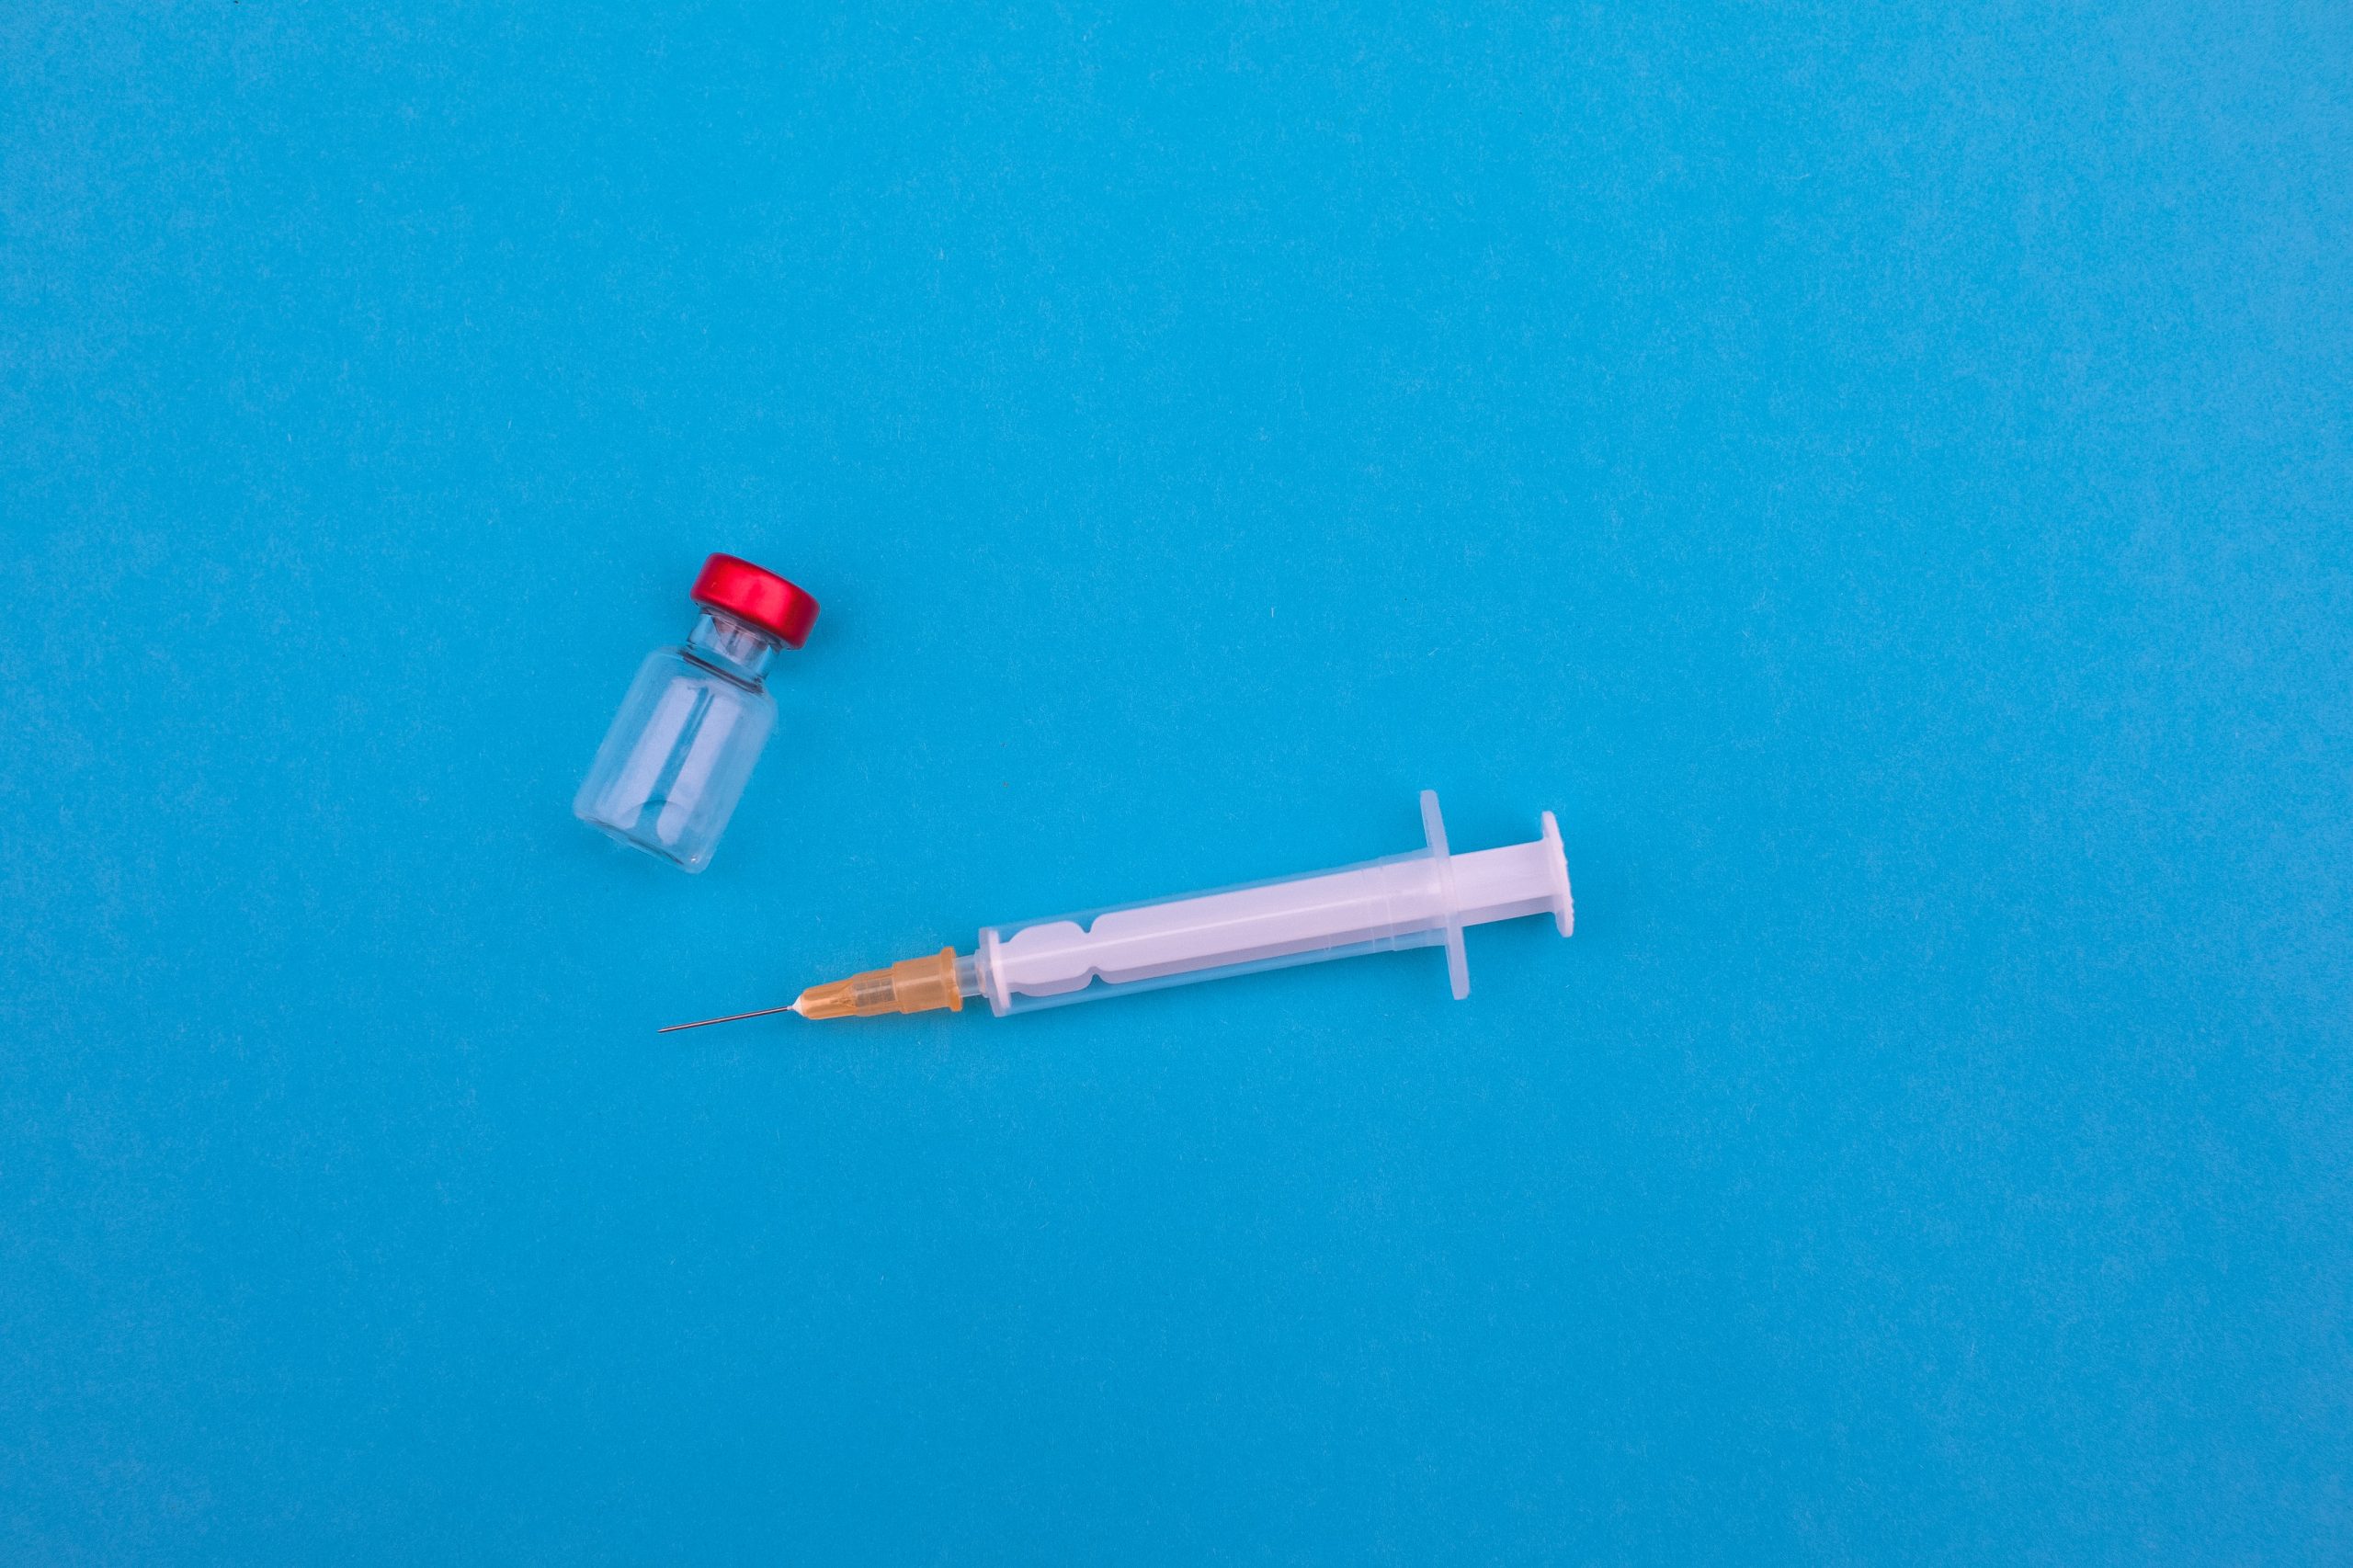 News Of COVID 19 Vaccine Has Vegas Eyeing Faster Rebound Scaled 